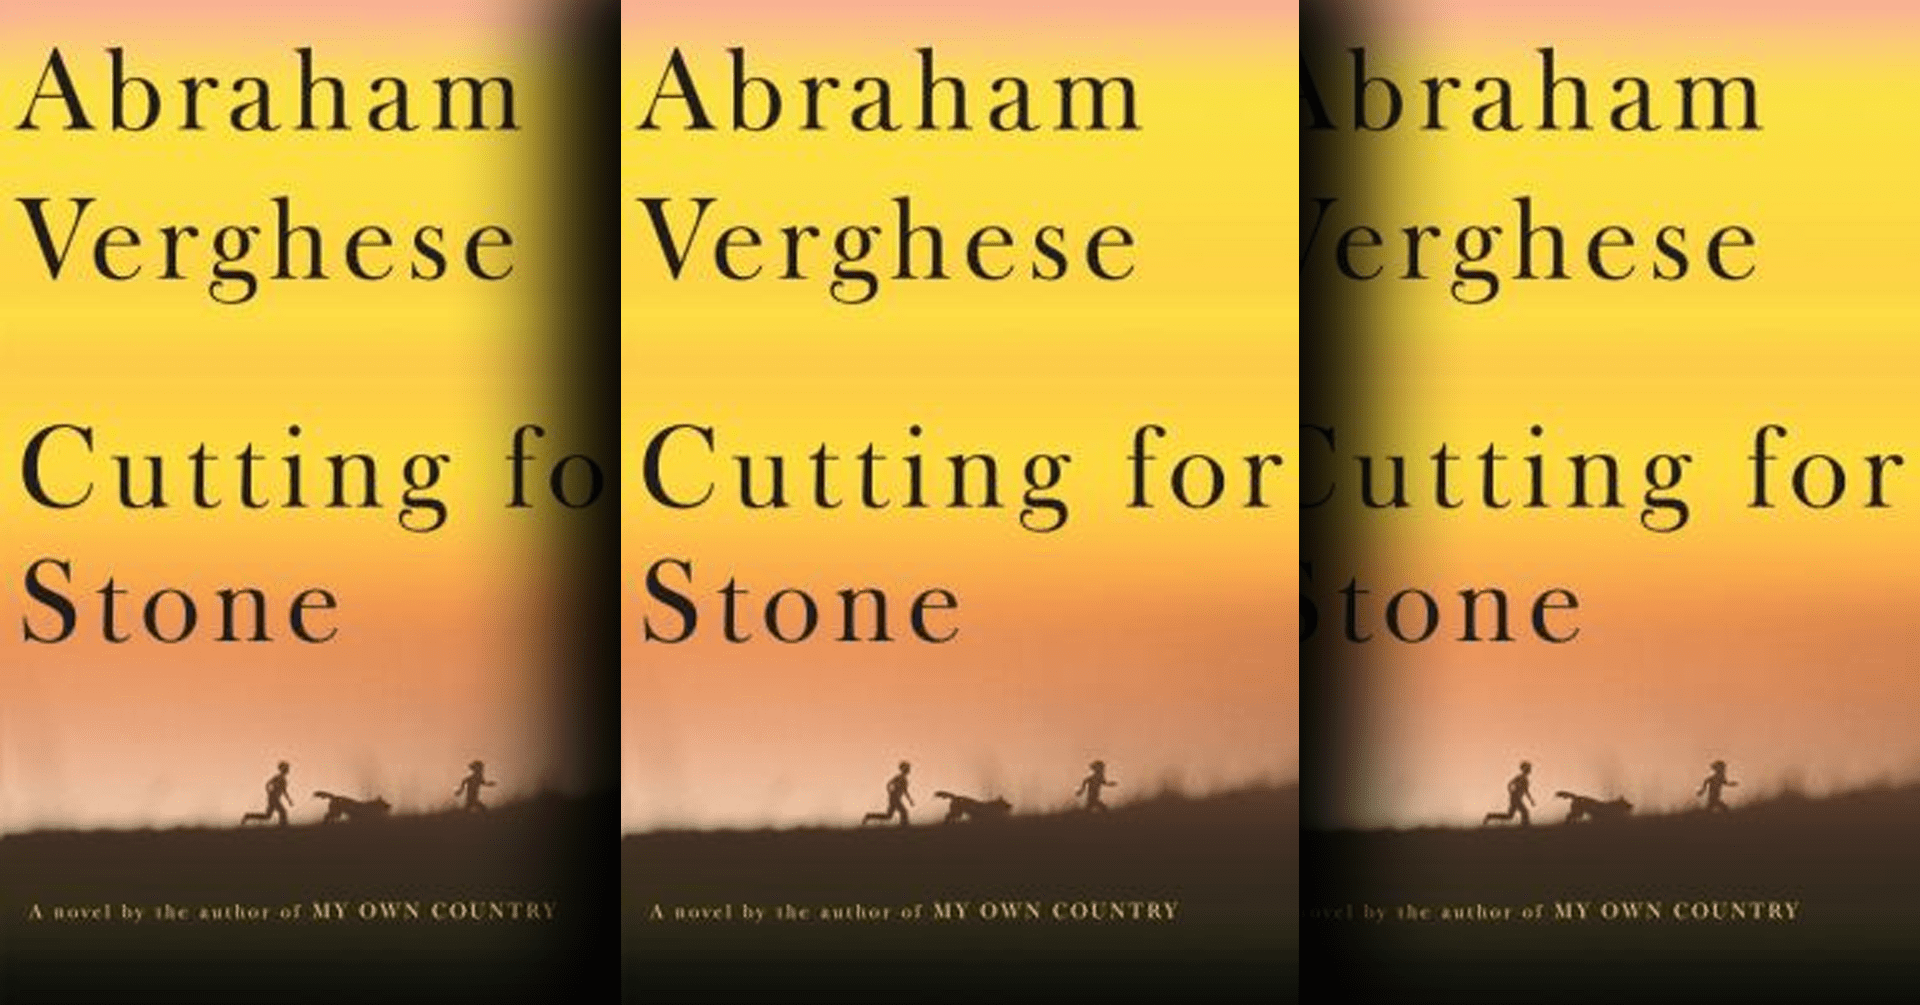 Cutting for Stone by Abraham Verghese (book cover)